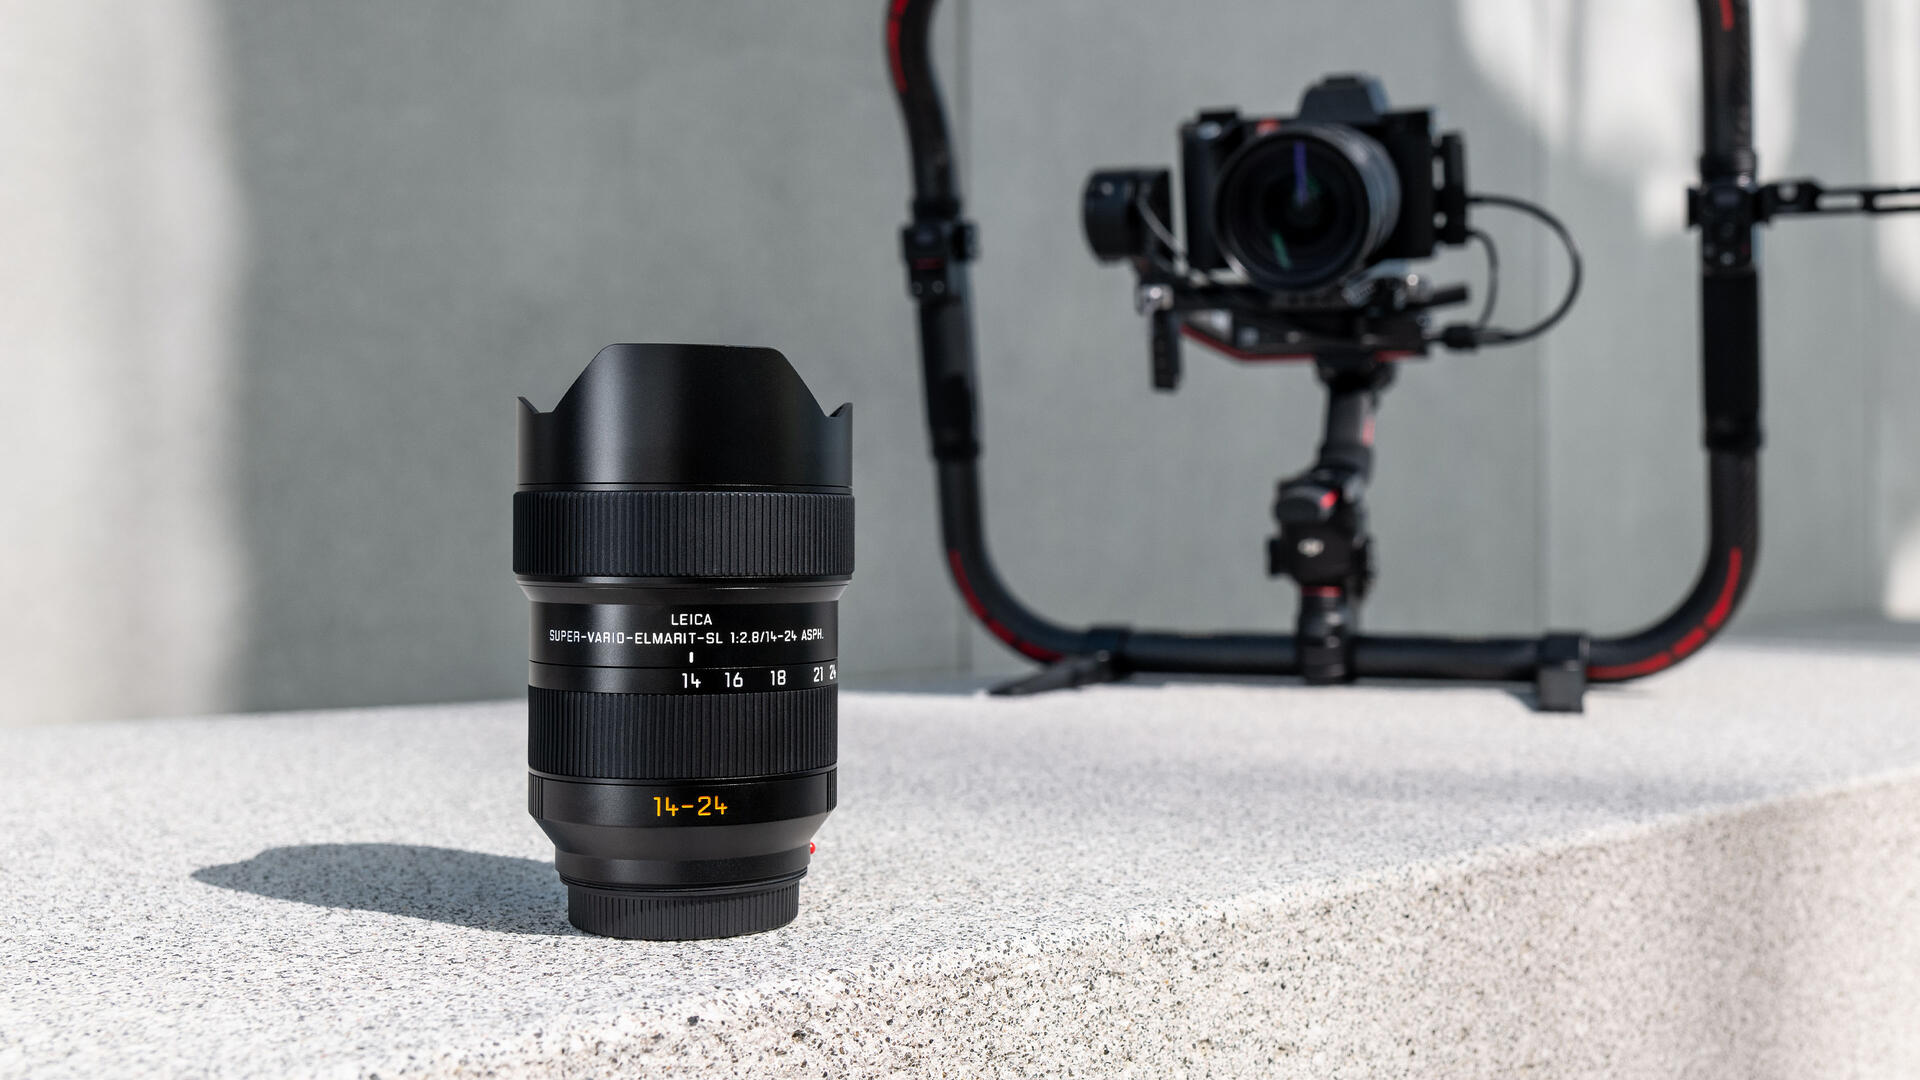 Leica Super-Vario-Elmarit-SL 14-24 f/2.8 ASPH. stands in front of a Leica SL2-S with a Leica Super-Vario-Elmarit-SL 14-24 f/2.8 ASPH. in a gimbal cage.